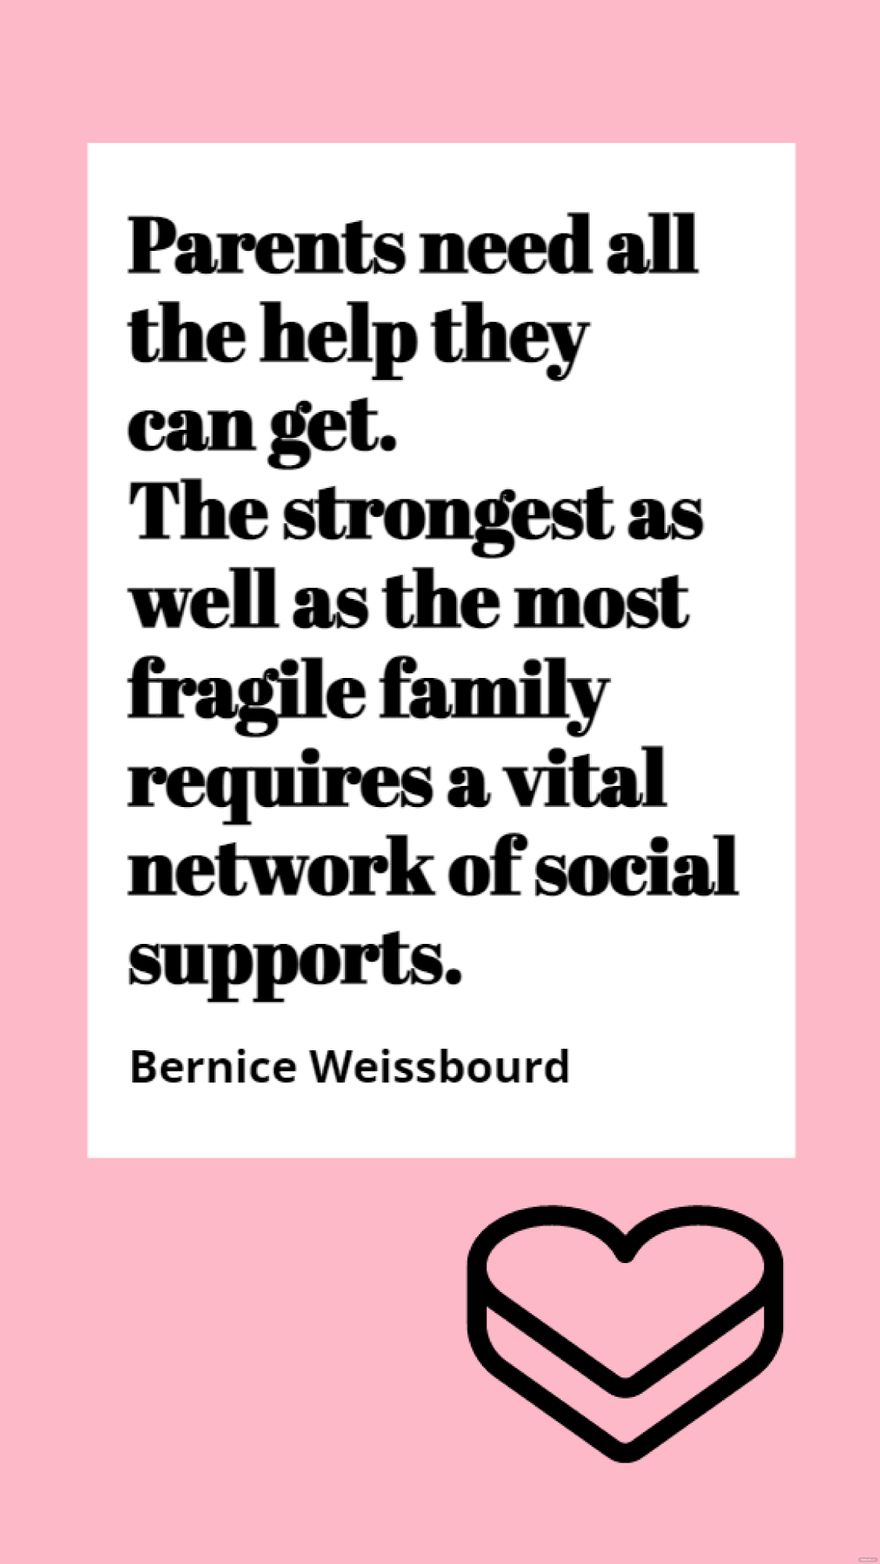 Bernice Weissbourd - Parents need all the help they can get. The strongest as well as the most fragile family requires a vital network of social supports.